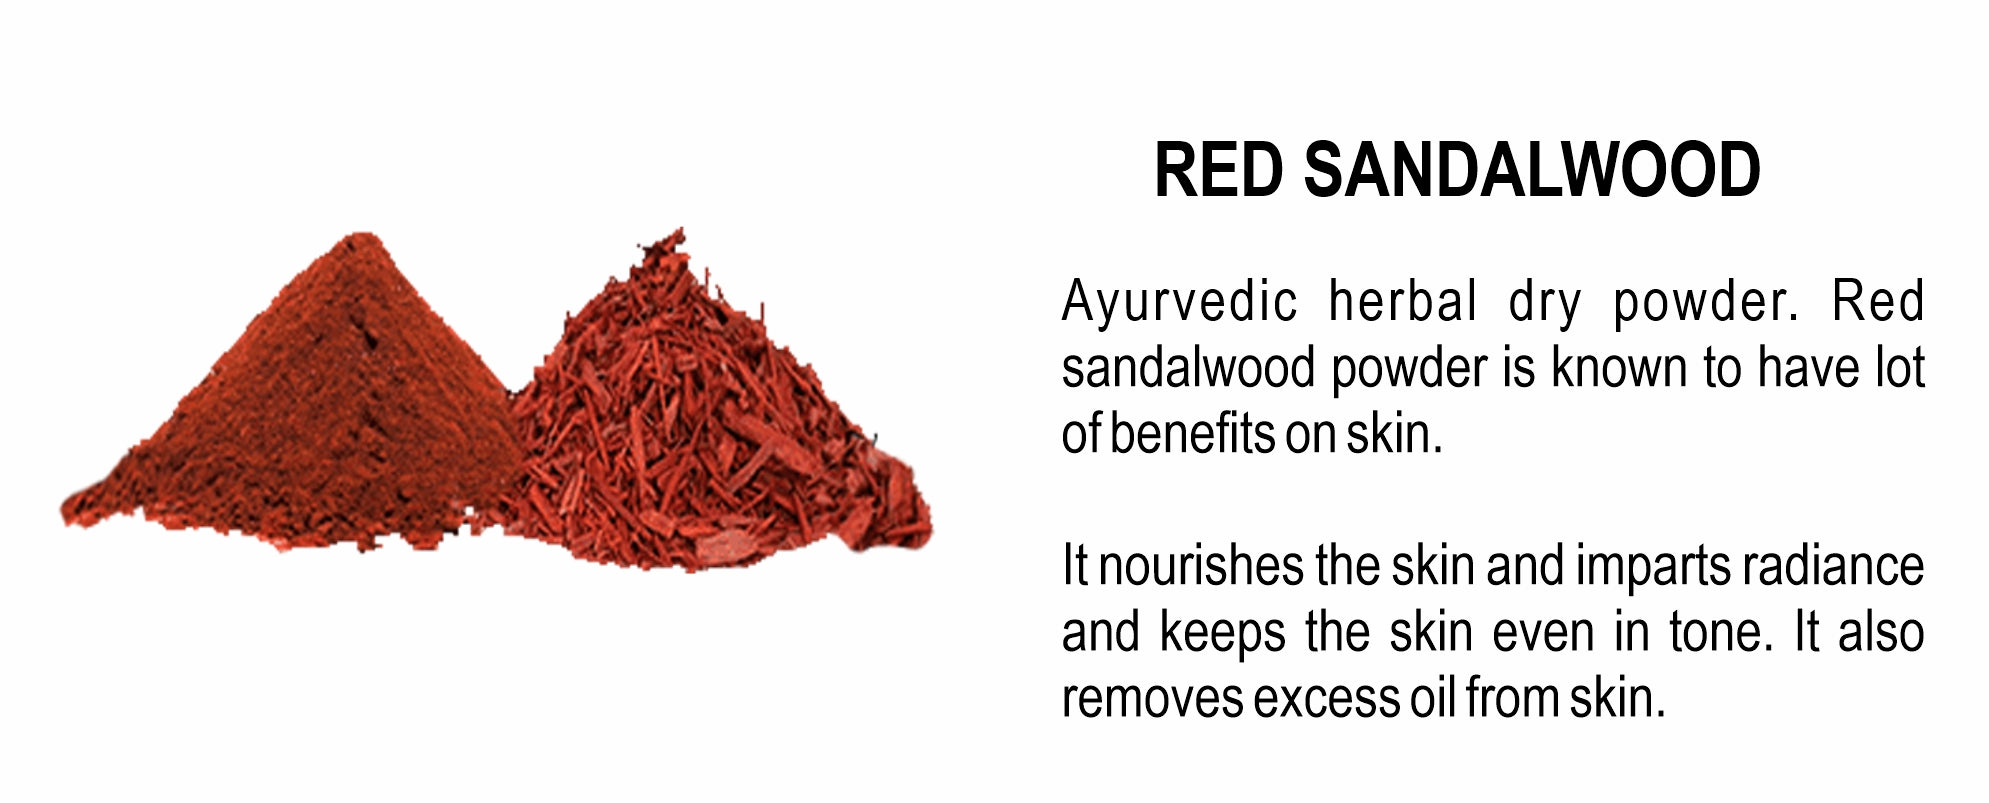 How to use Red Sandalwood to get fair and Glowing skin. - YouTube